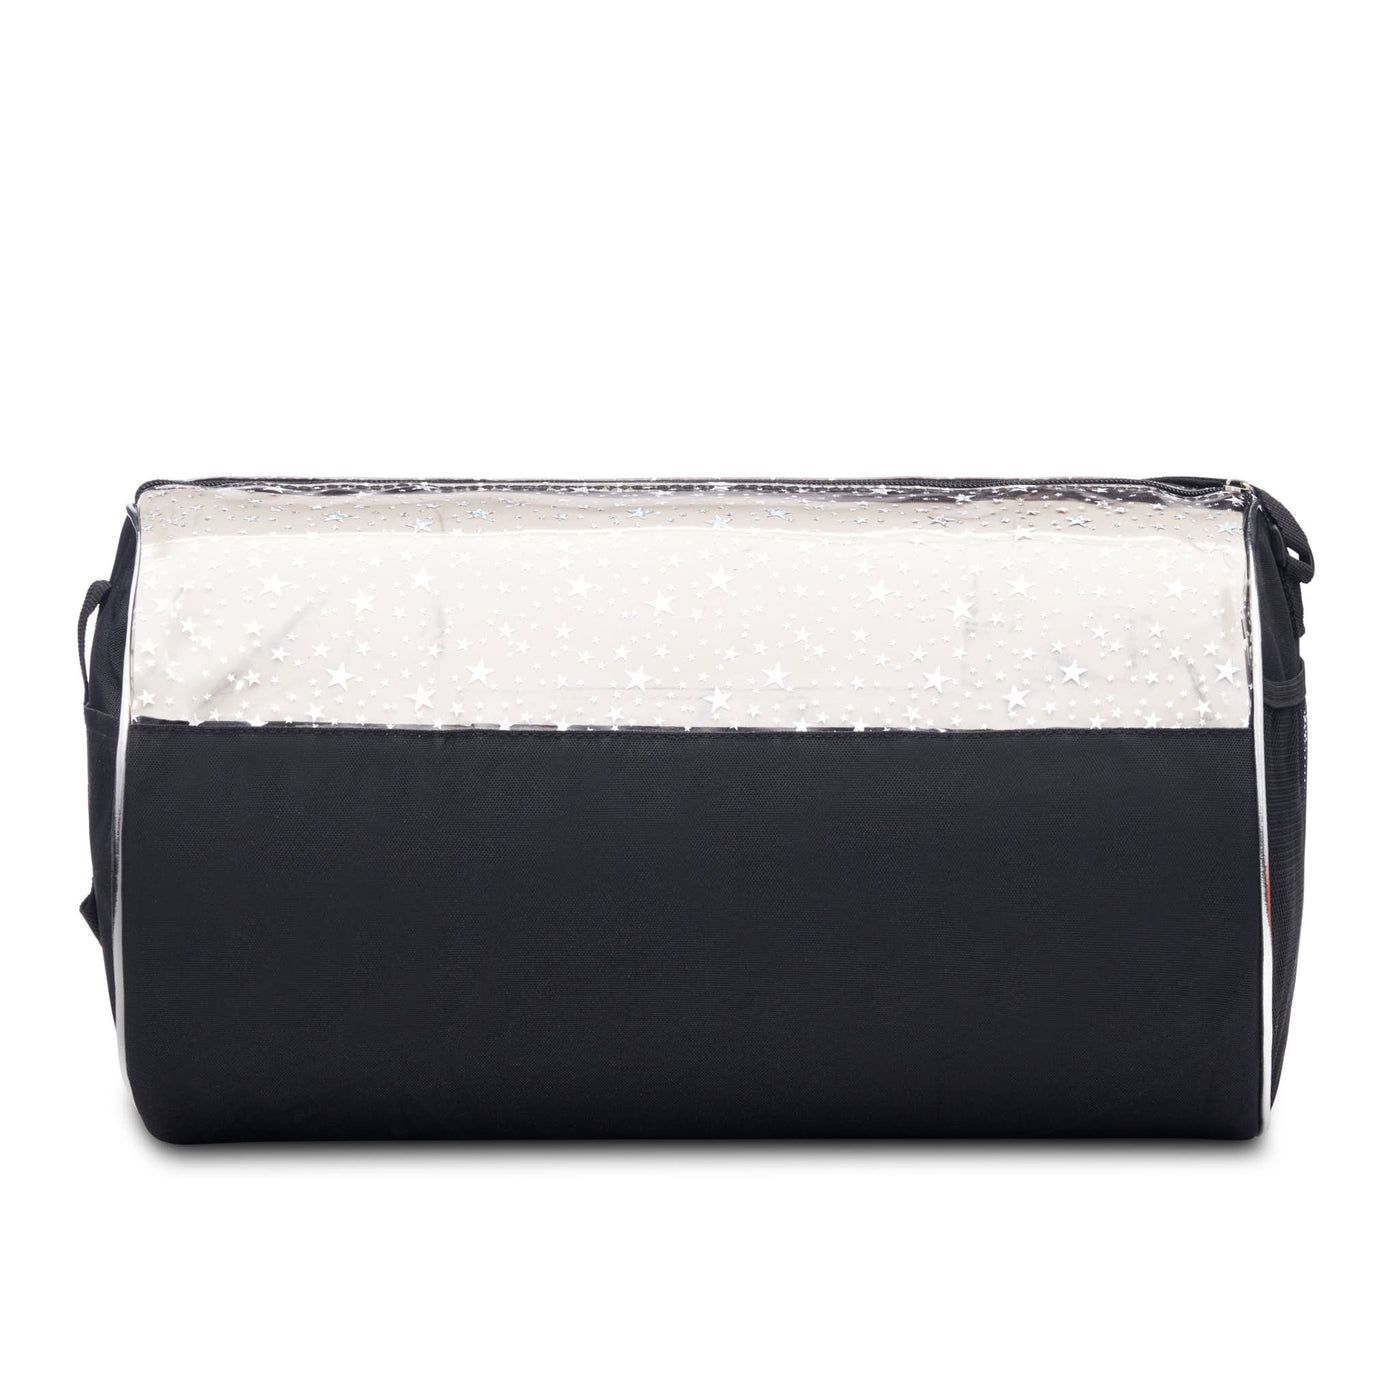 Dance Duffel Bag Black and Clear with Silver Stars